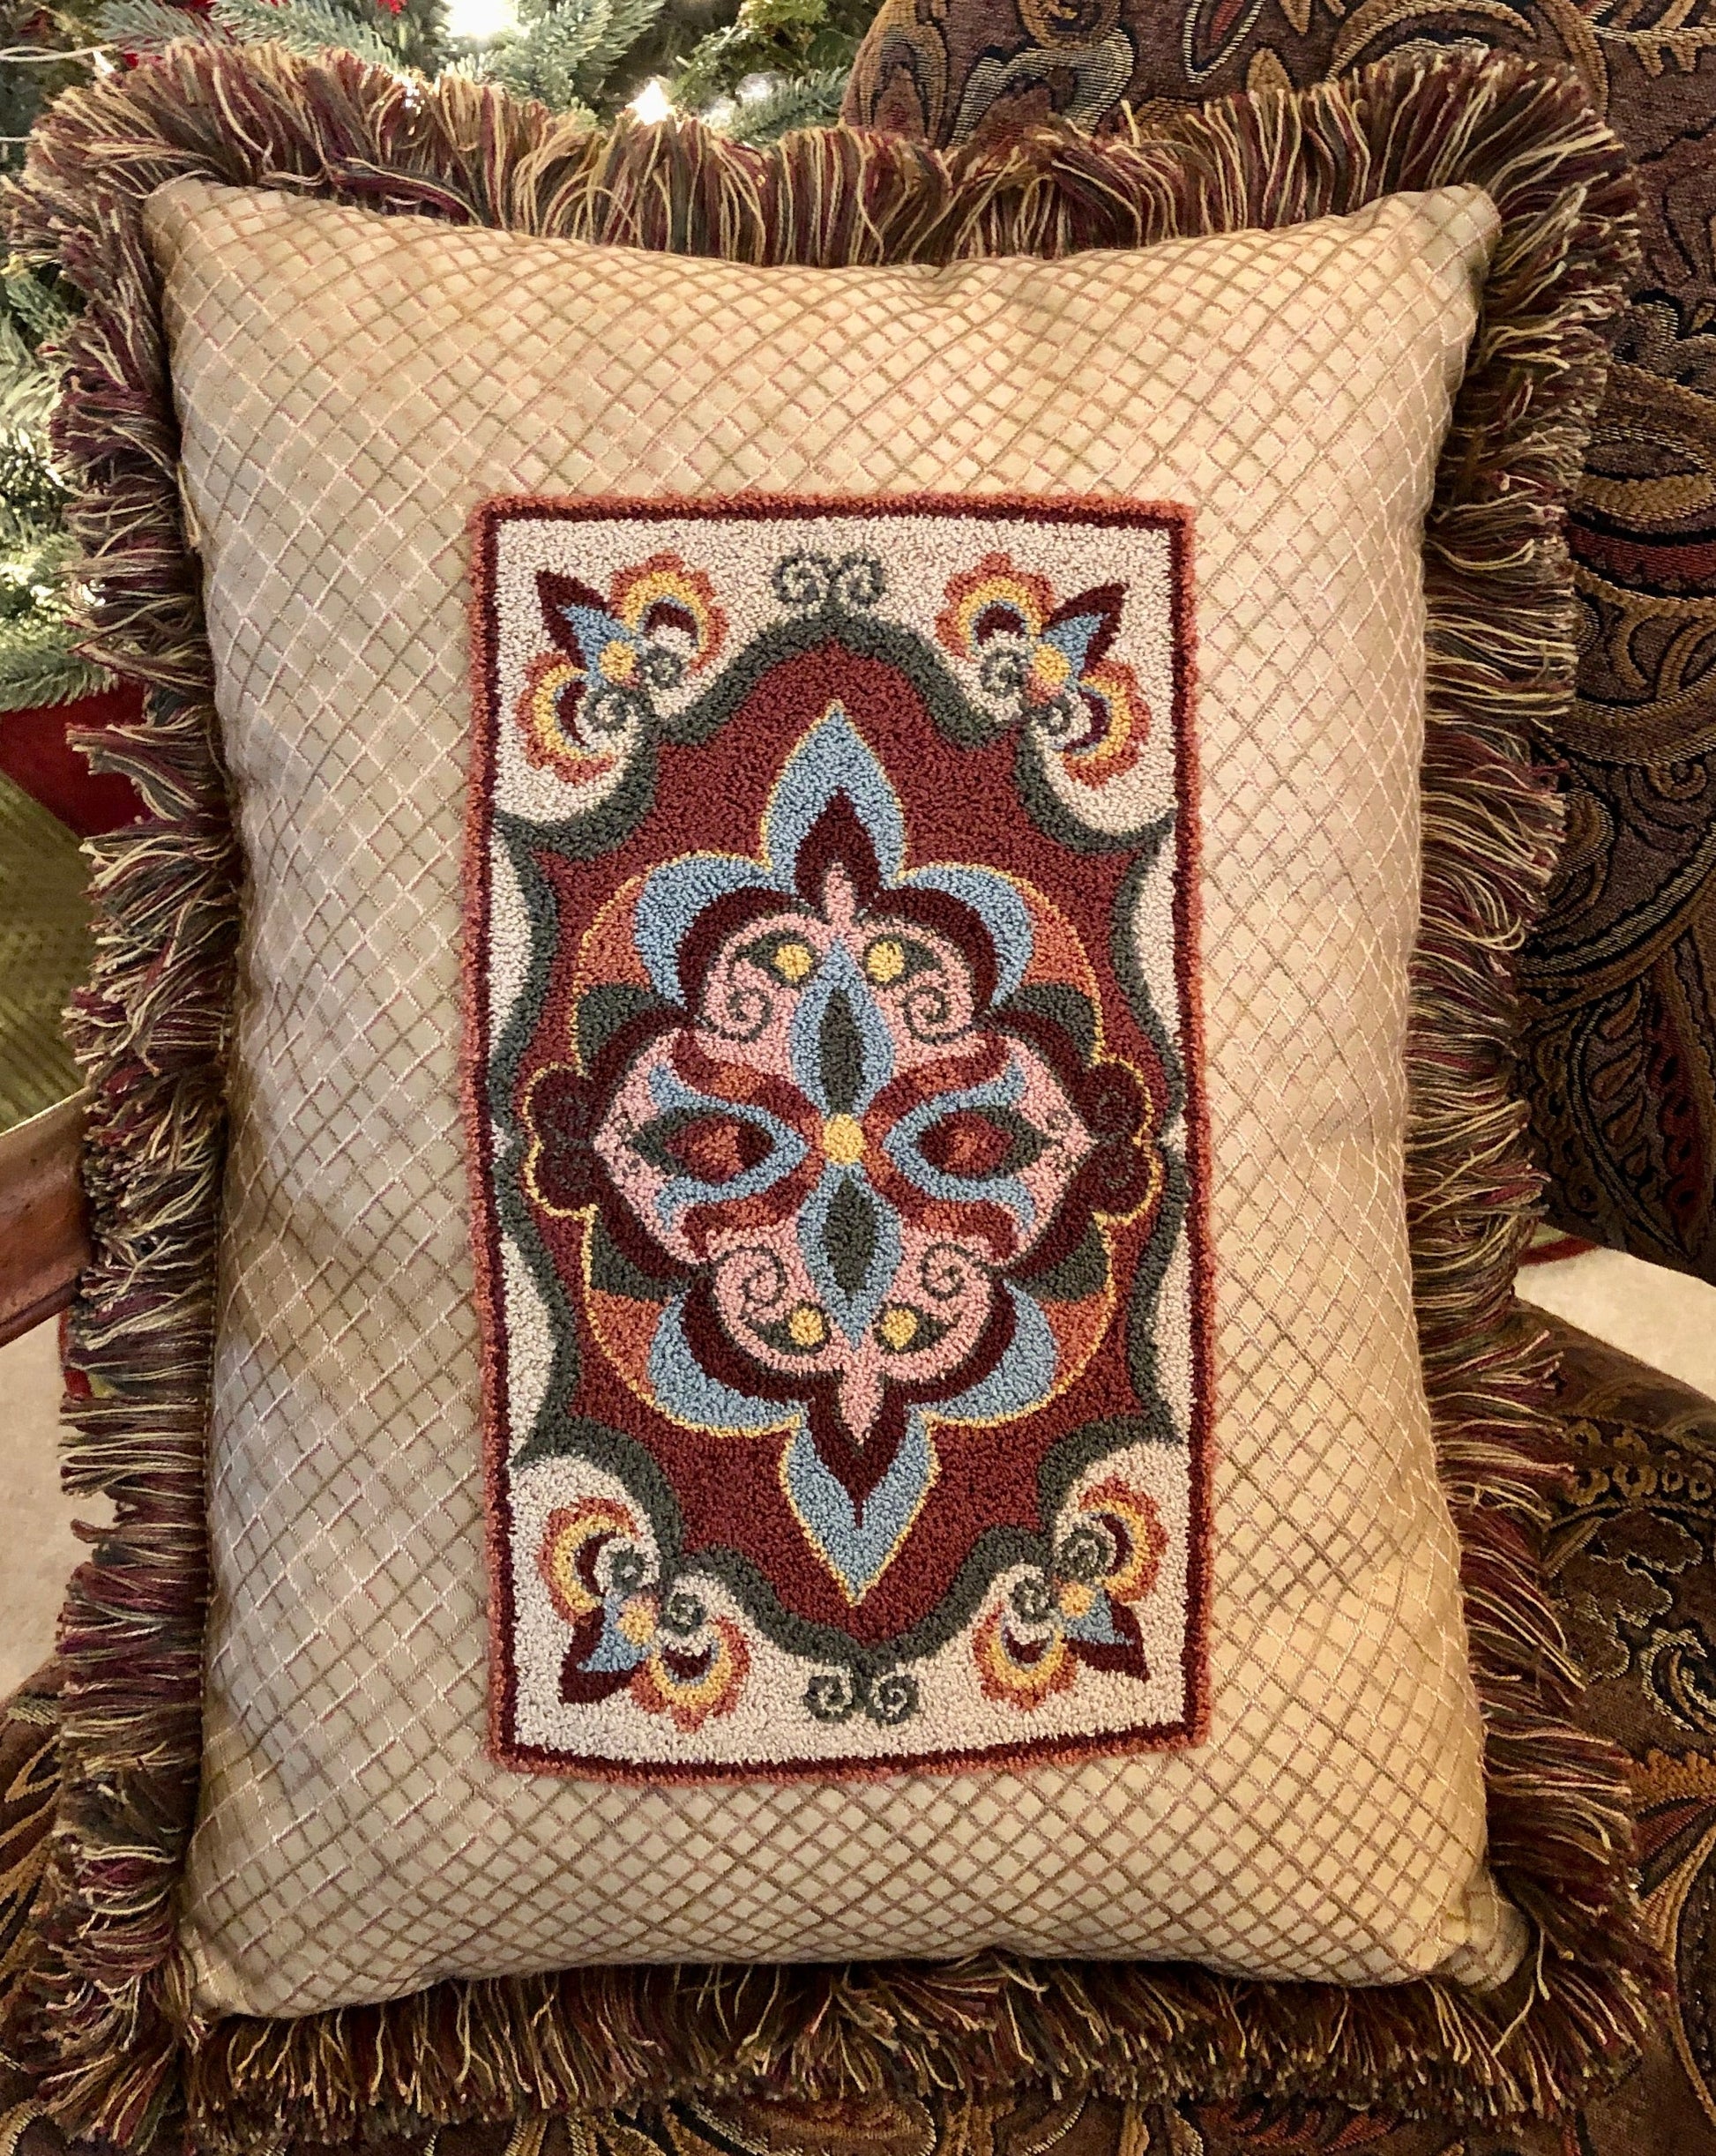 Punch Needle Pattern- Antiquity. A thread Punch Needle design created into a beautiful pillow. Design by Orphaned Wool